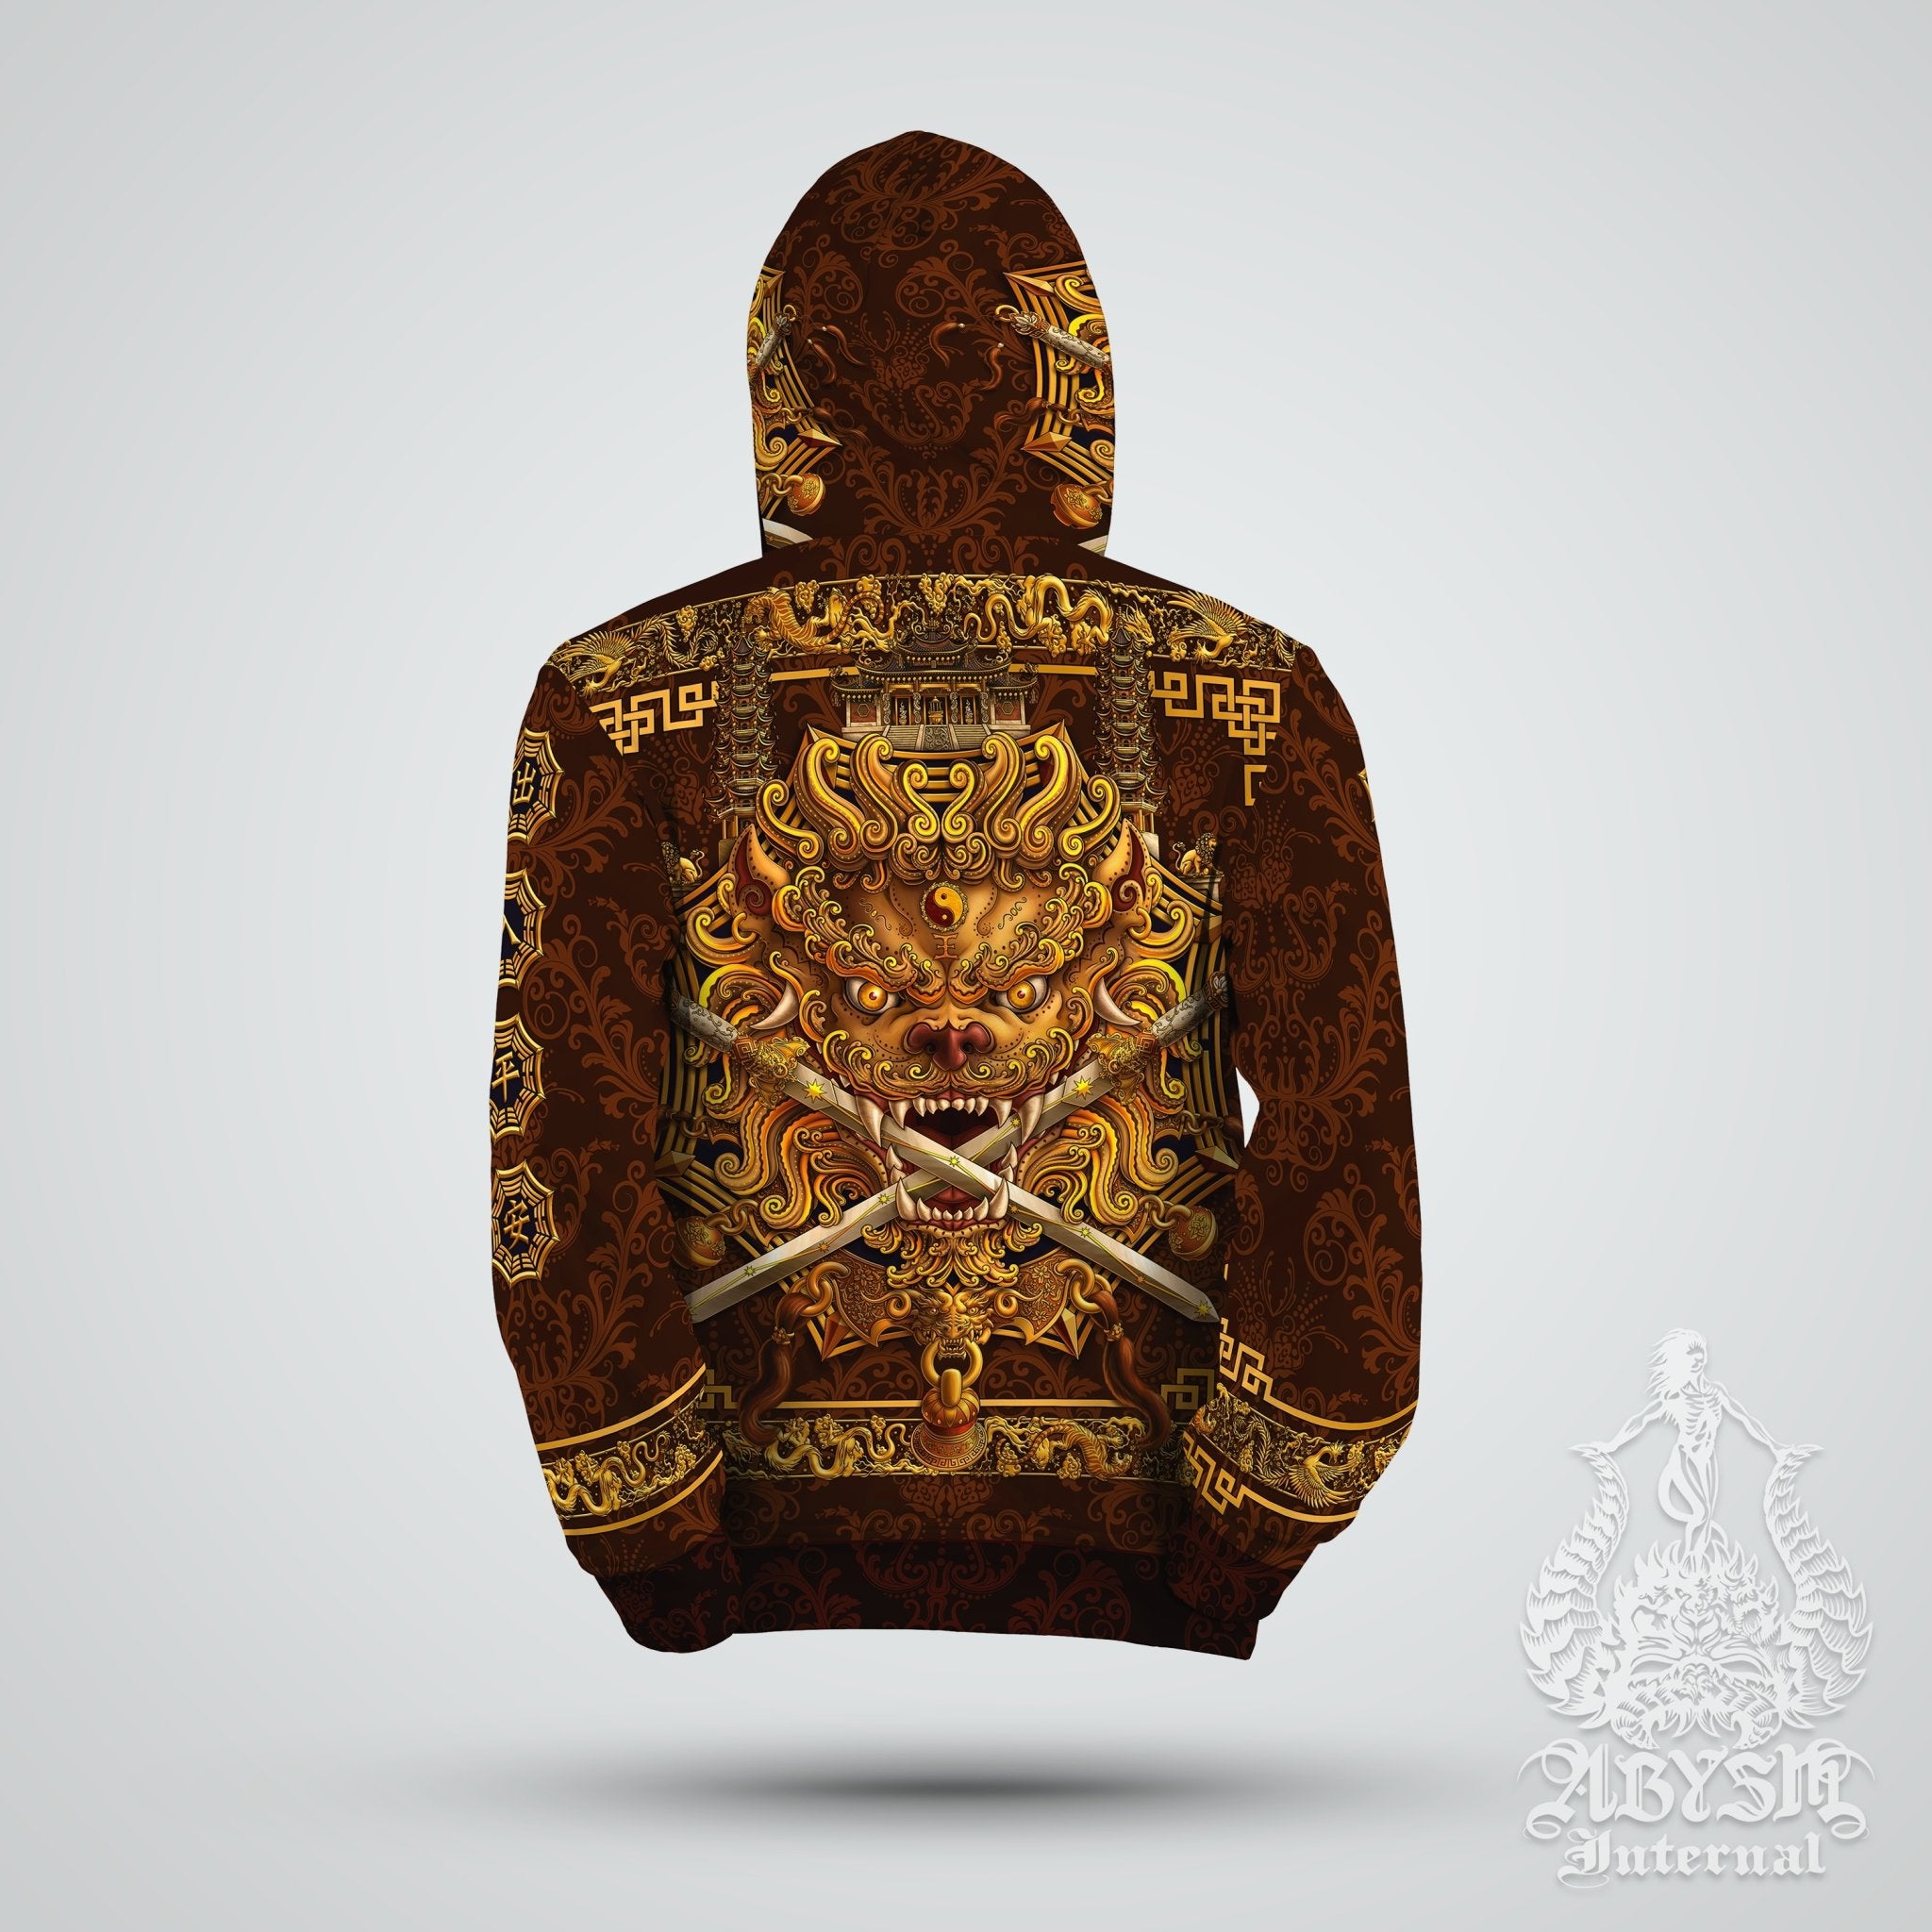 Lion Hoodie, Street Outfit, Chinese Streetwear, Taiwan Sword Lion, Asian Art Apparel, Alternative Clothing, Unisex - Gold - Abysm Internal